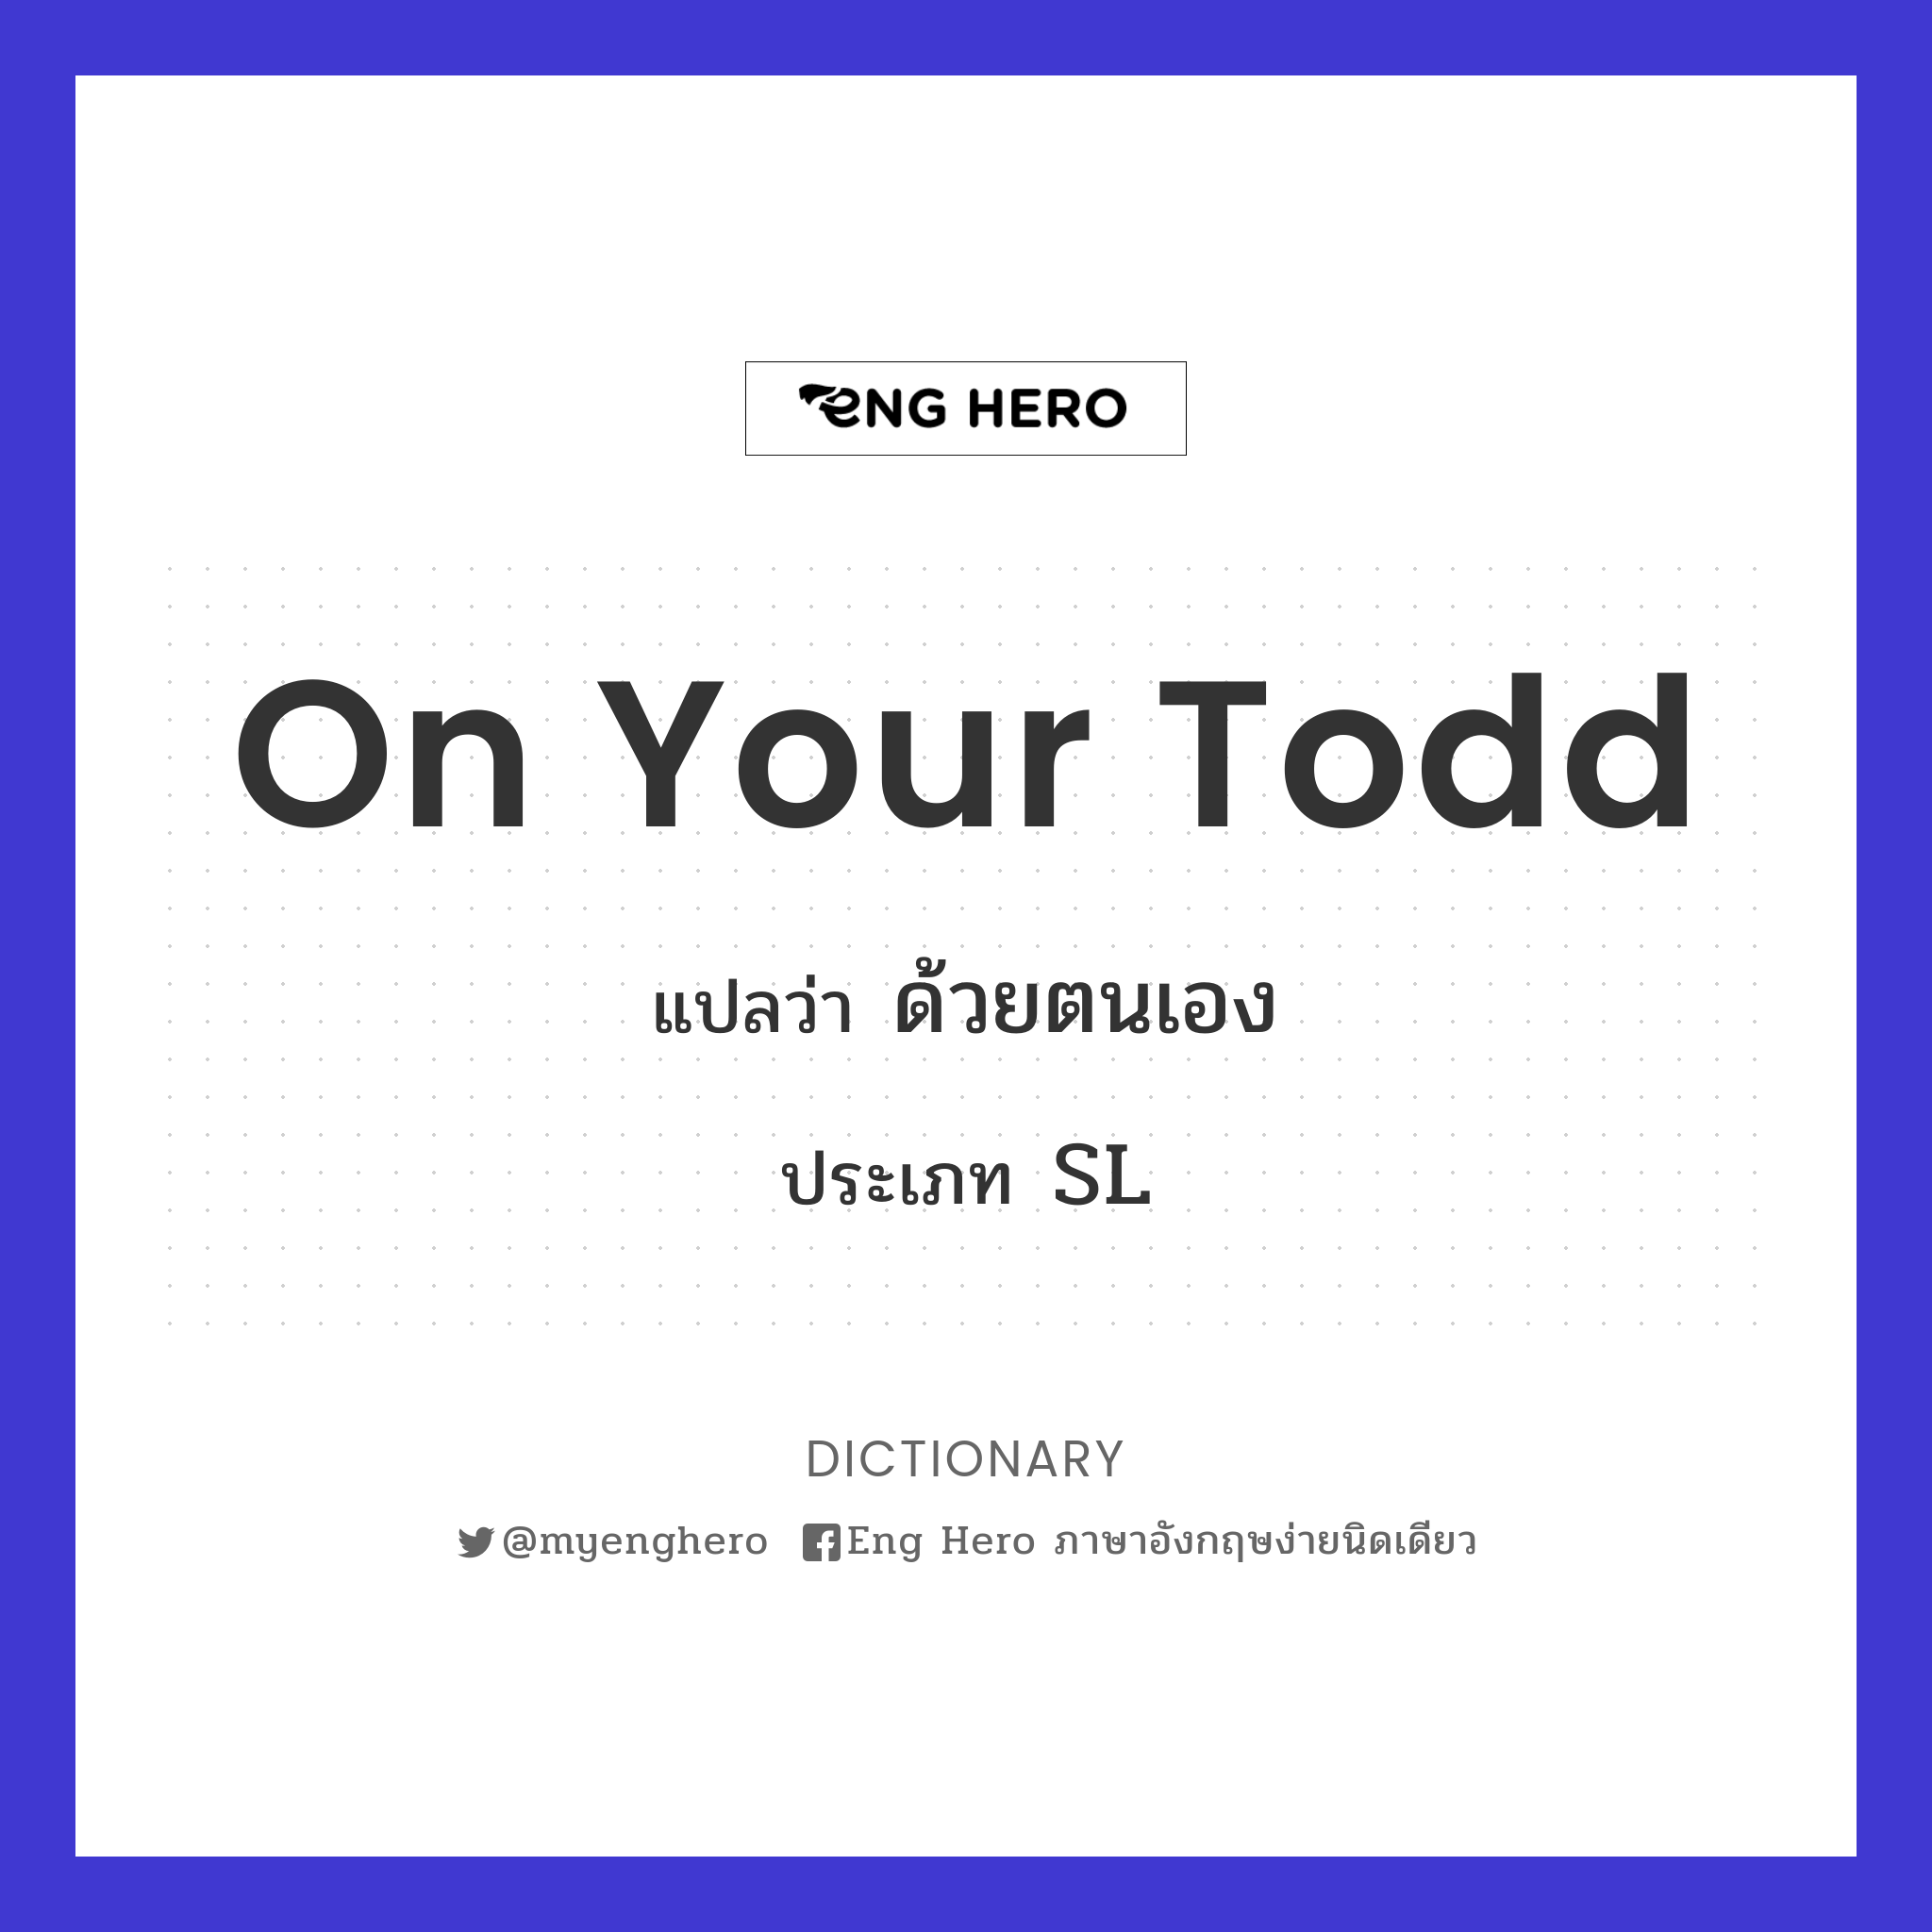 On your Todd